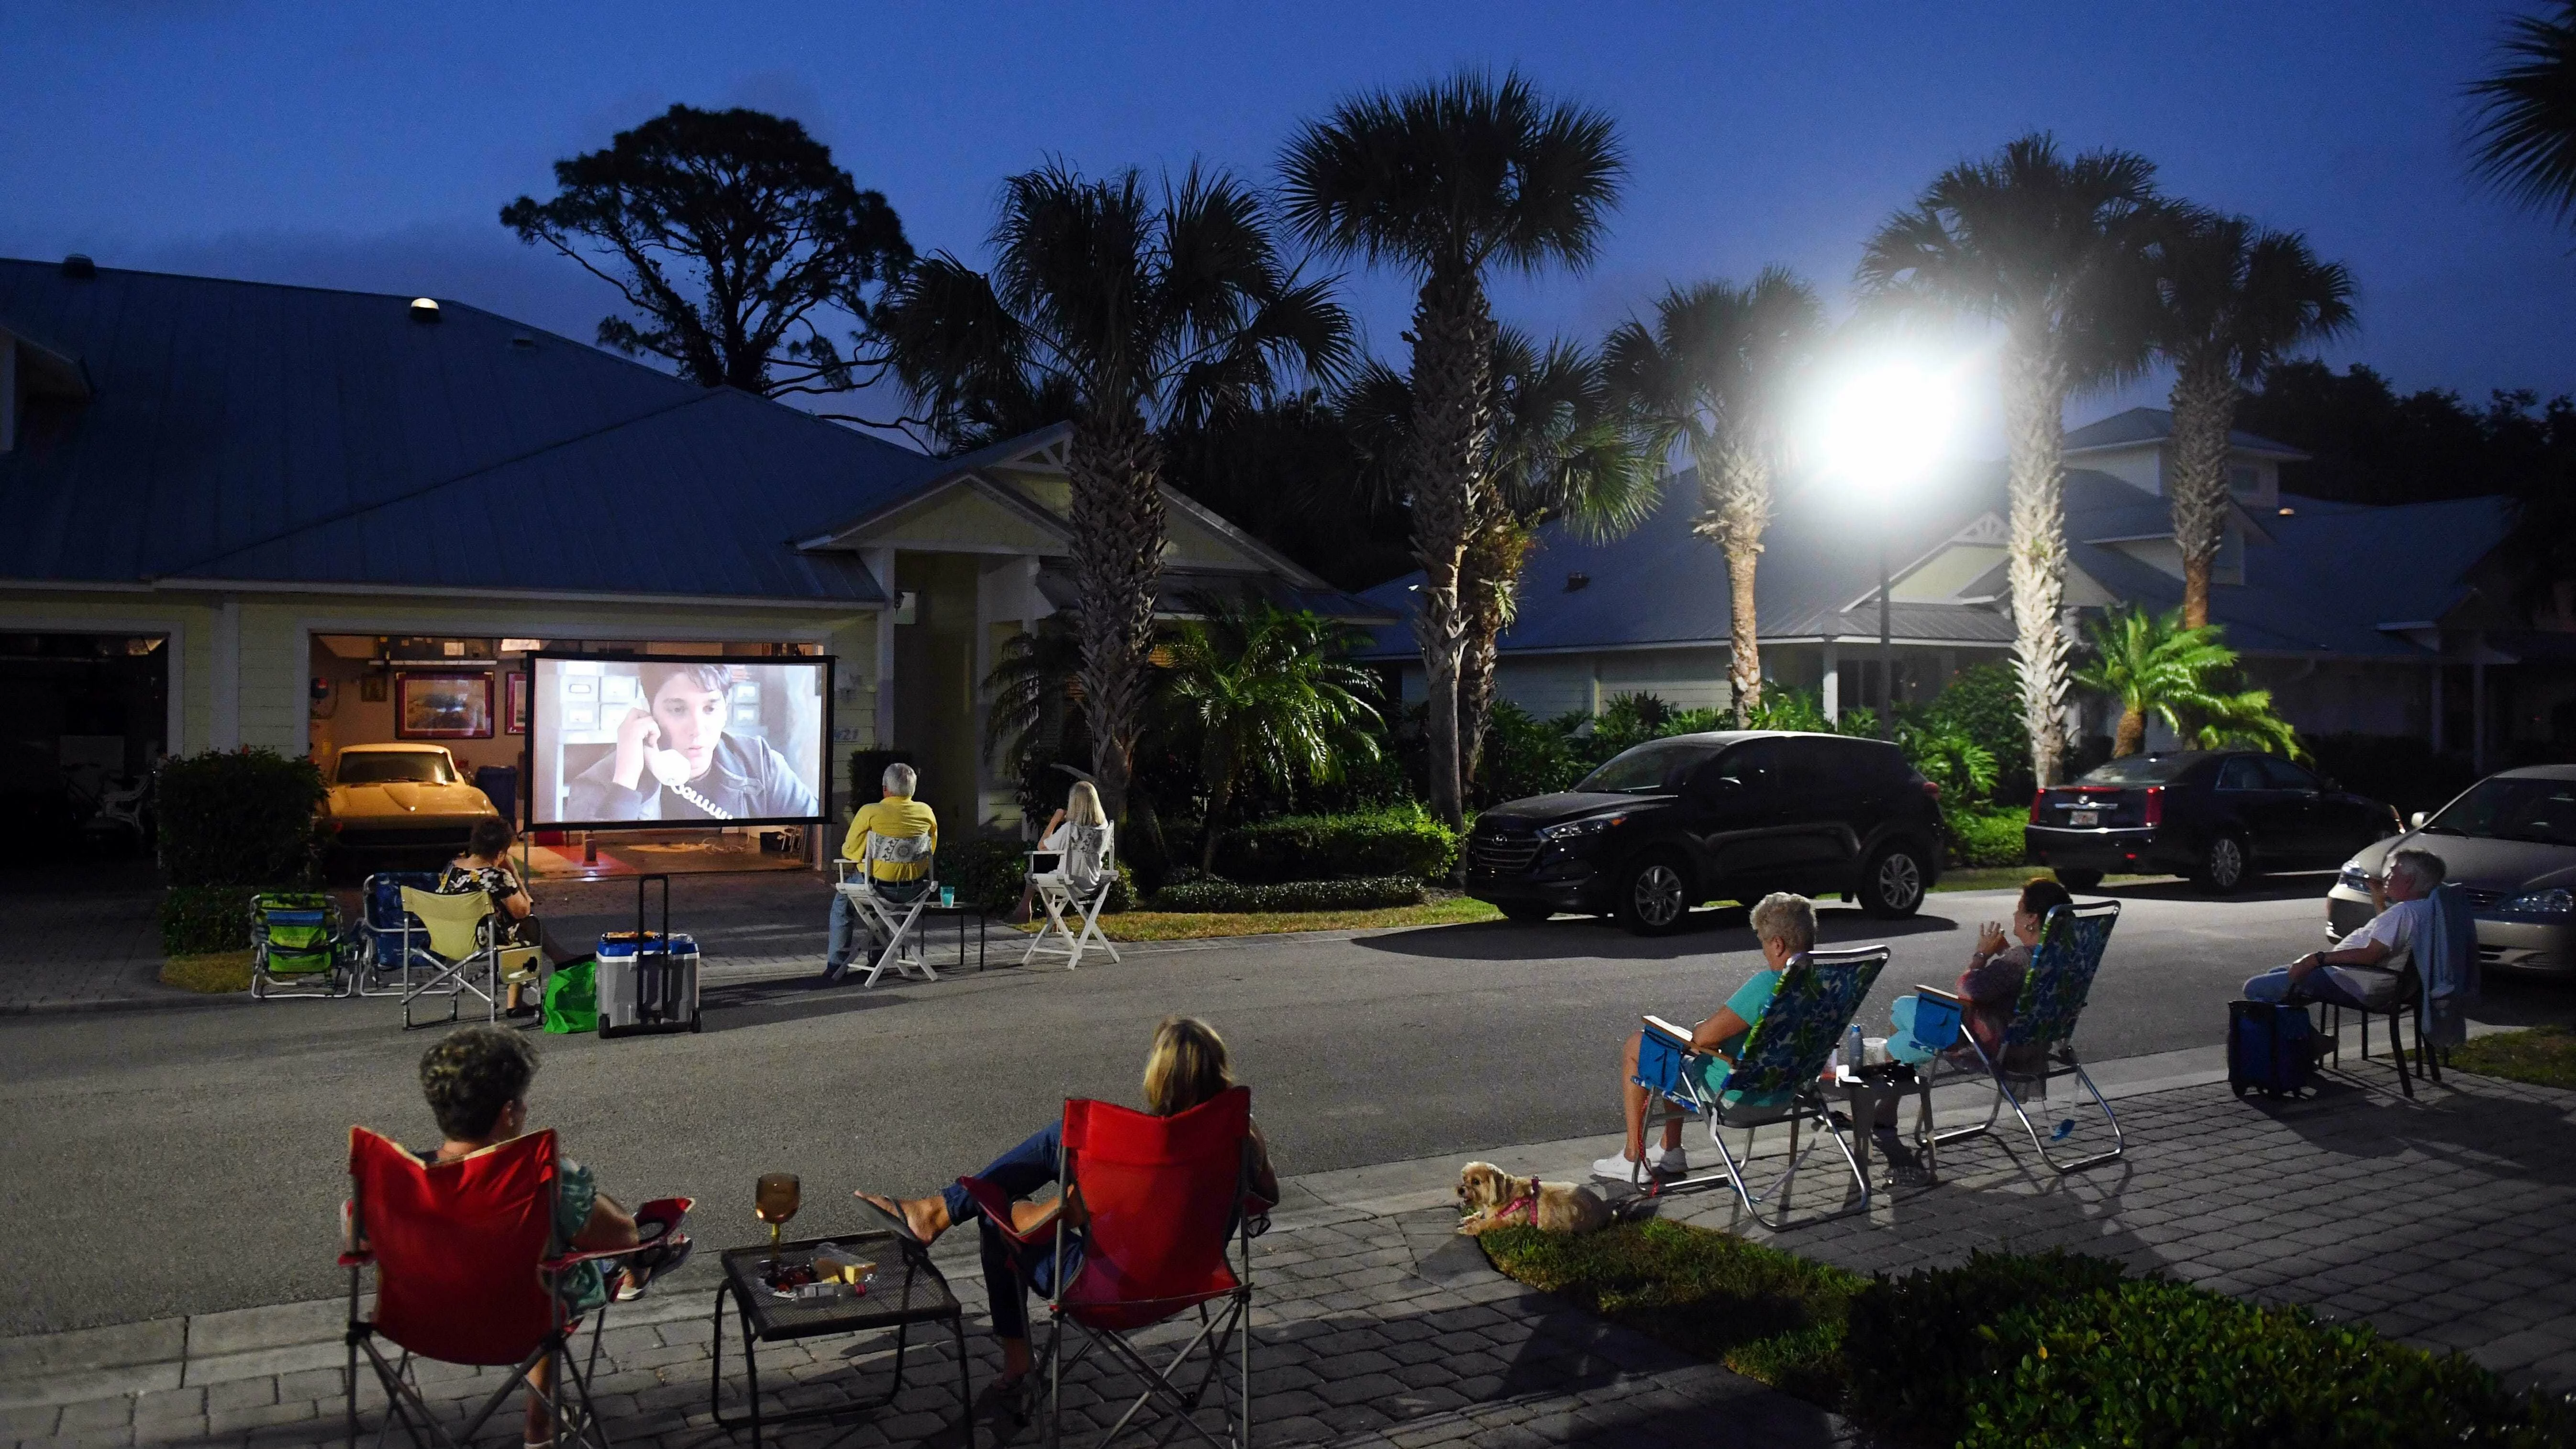 Coronavirus in Indian River County: Movie night helps neighbors stay connected